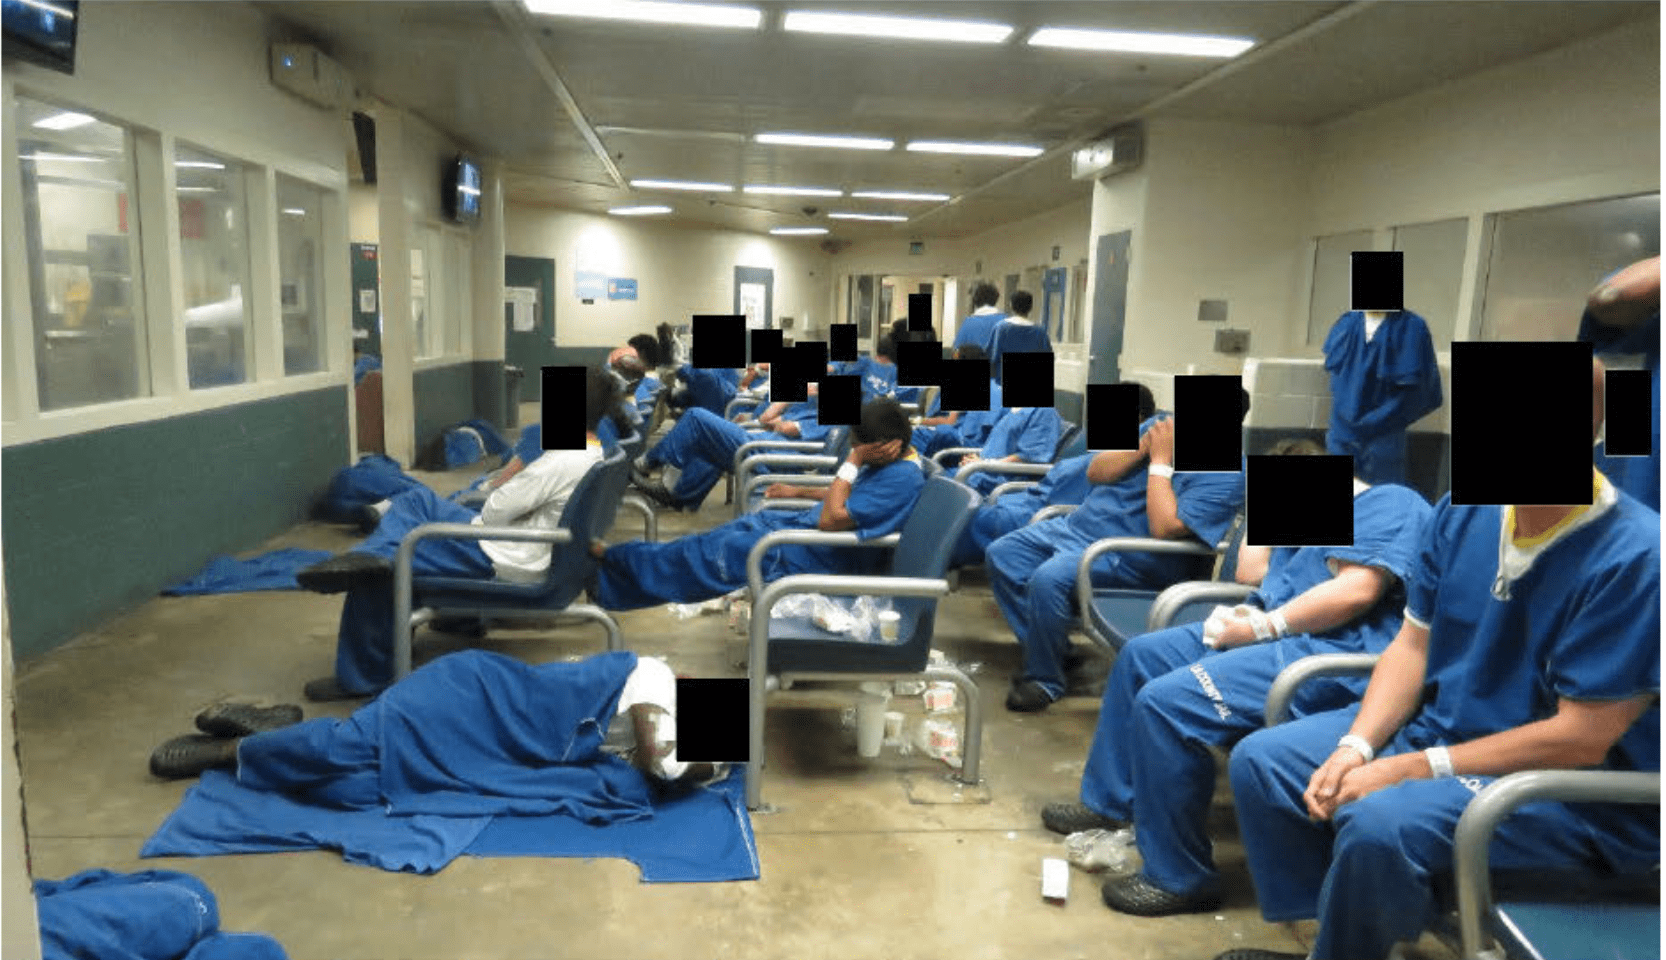 This photo shows Los Angeles County's Inmate Reception Center. Men sit in blue jumpsuits either in chairs or sleeping on a concrete floor. Garbage sits on the floor as well. The faces are censored.